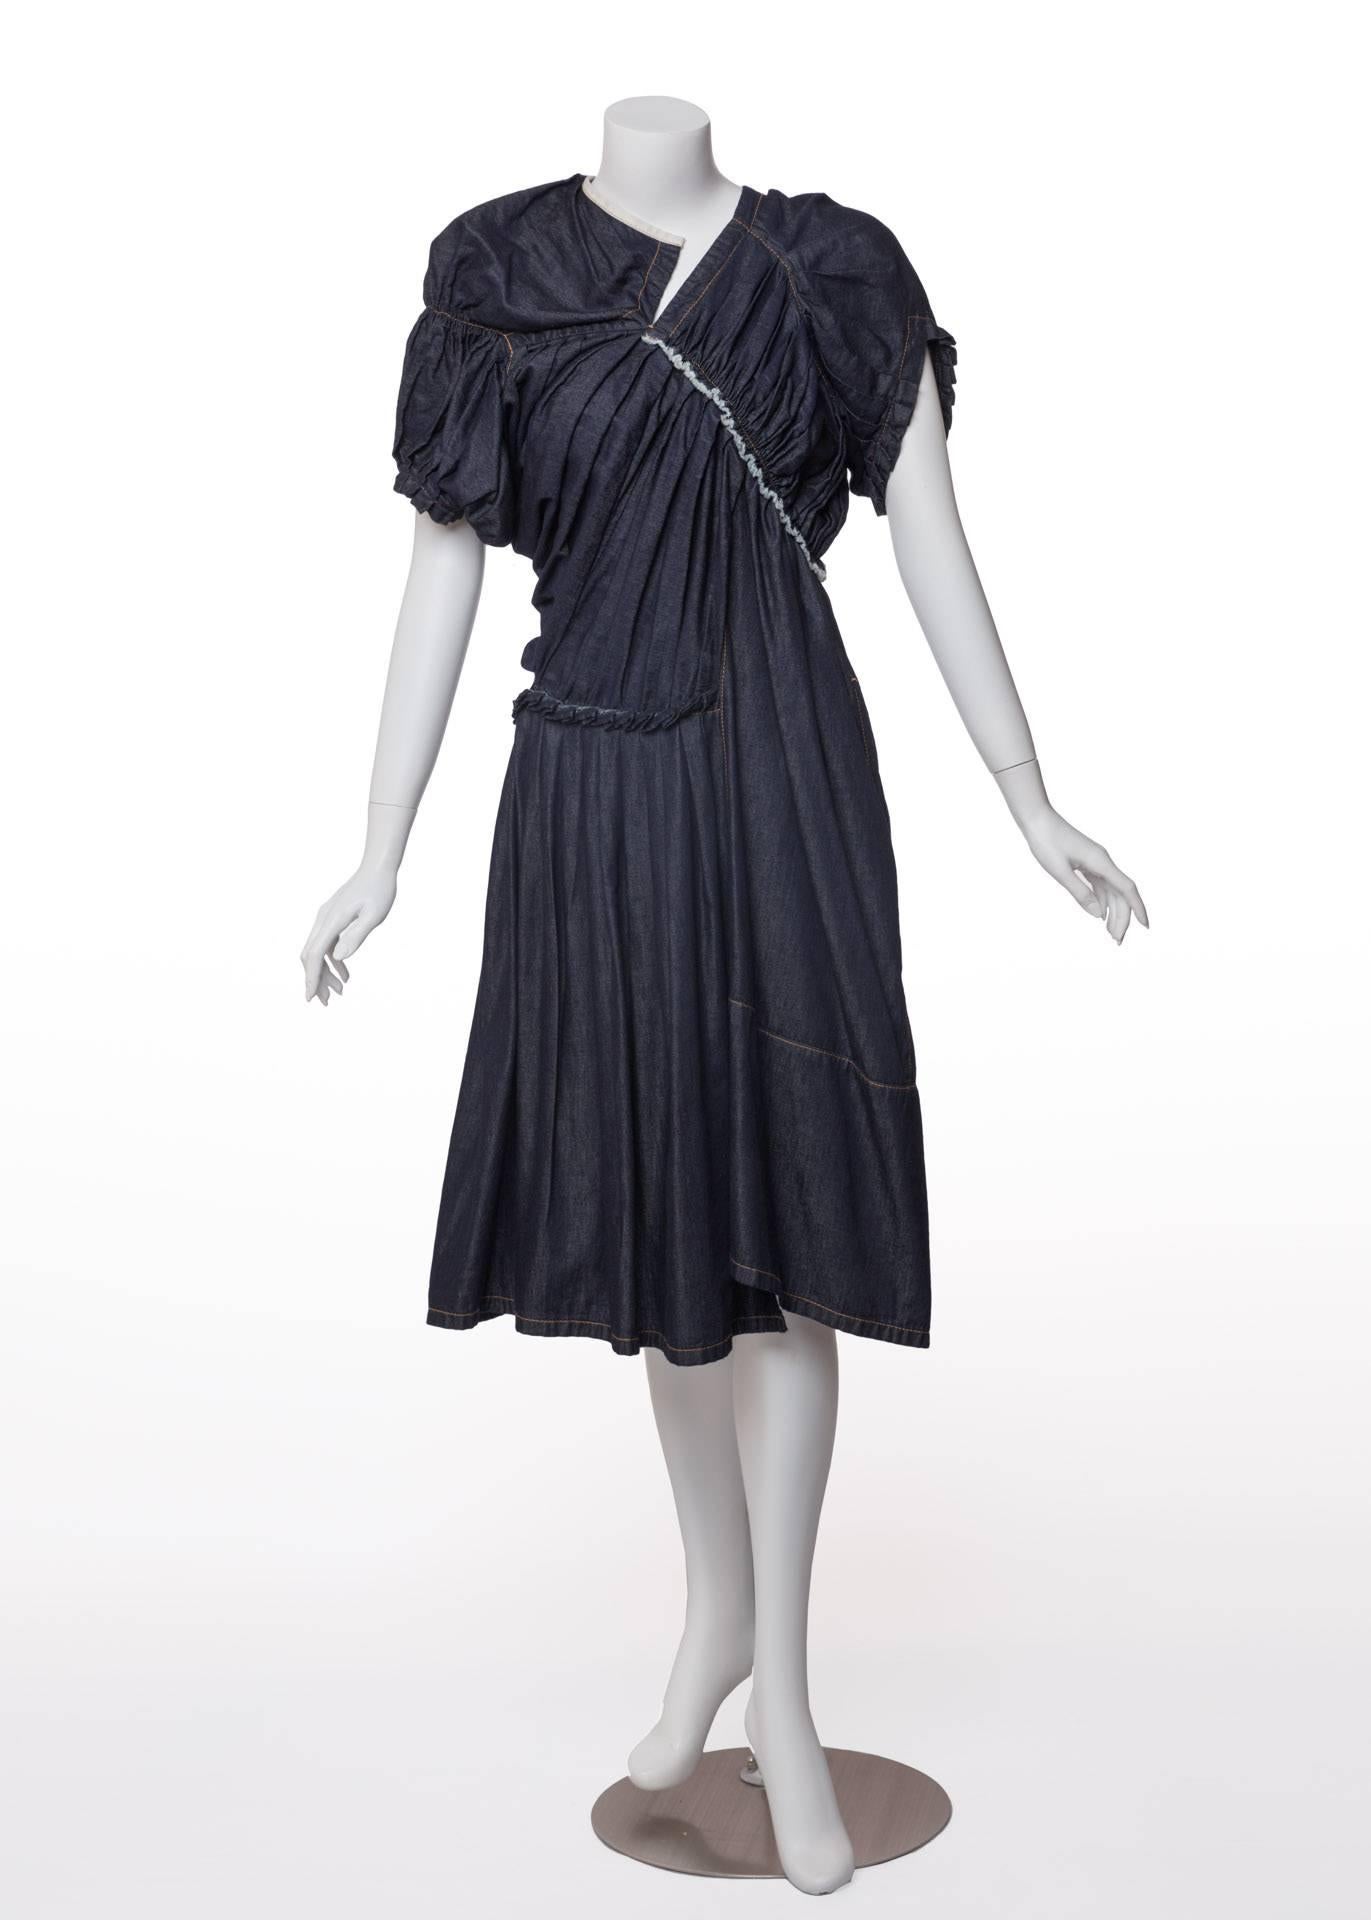 Denim is masterfully rethought in this avant-garde Tricot Comme des Garçons day dress . The utilitarian textile in a rich indigo blue is gathered, pleated and ruffled to take on a lightweight appearance in the pretty knee-length silhouette. The